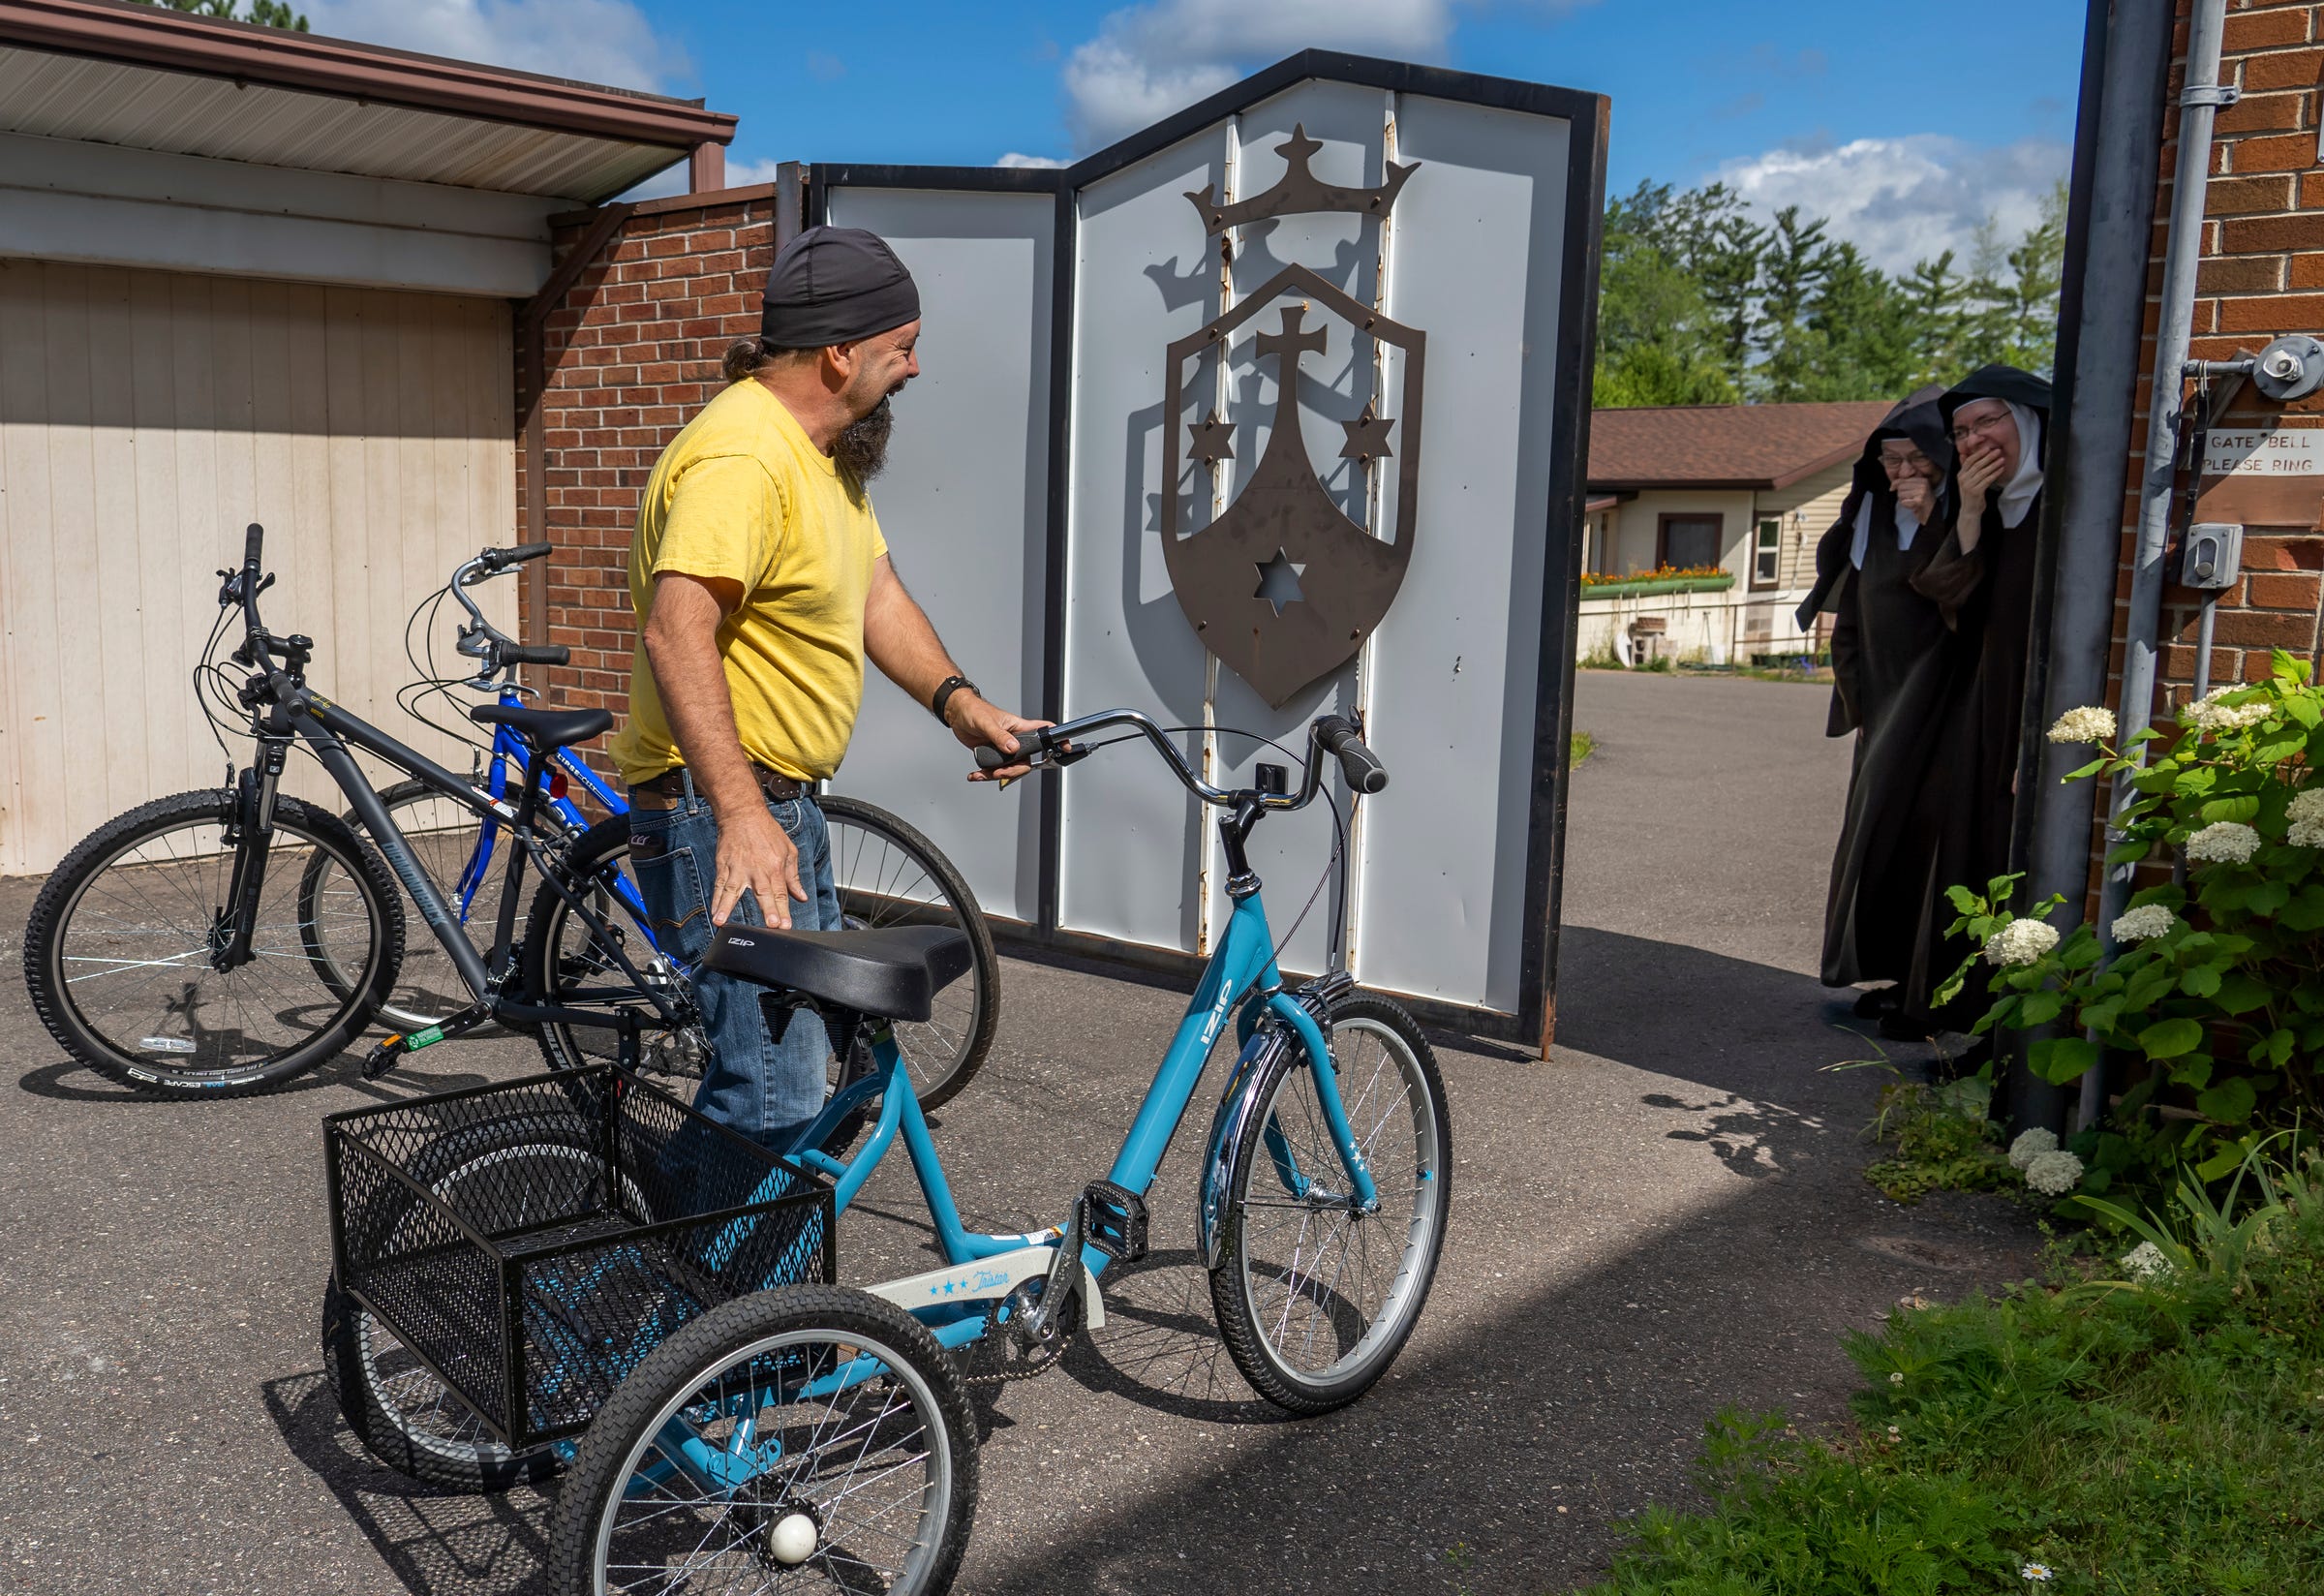 Steven Pringle, owner of Build a Bicycle - Bicycle Therapy, delivers three bikes as donations to surprised nuns at the Carmelite Monastery of the Holy Cross in Iron Mountain on Friday, July 29, 2022. Years ago, when he was struggling, Pringle wrote to the nuns asking for their prayers, and ever since then, he tries to return the favor by bringing unannounced gifts.